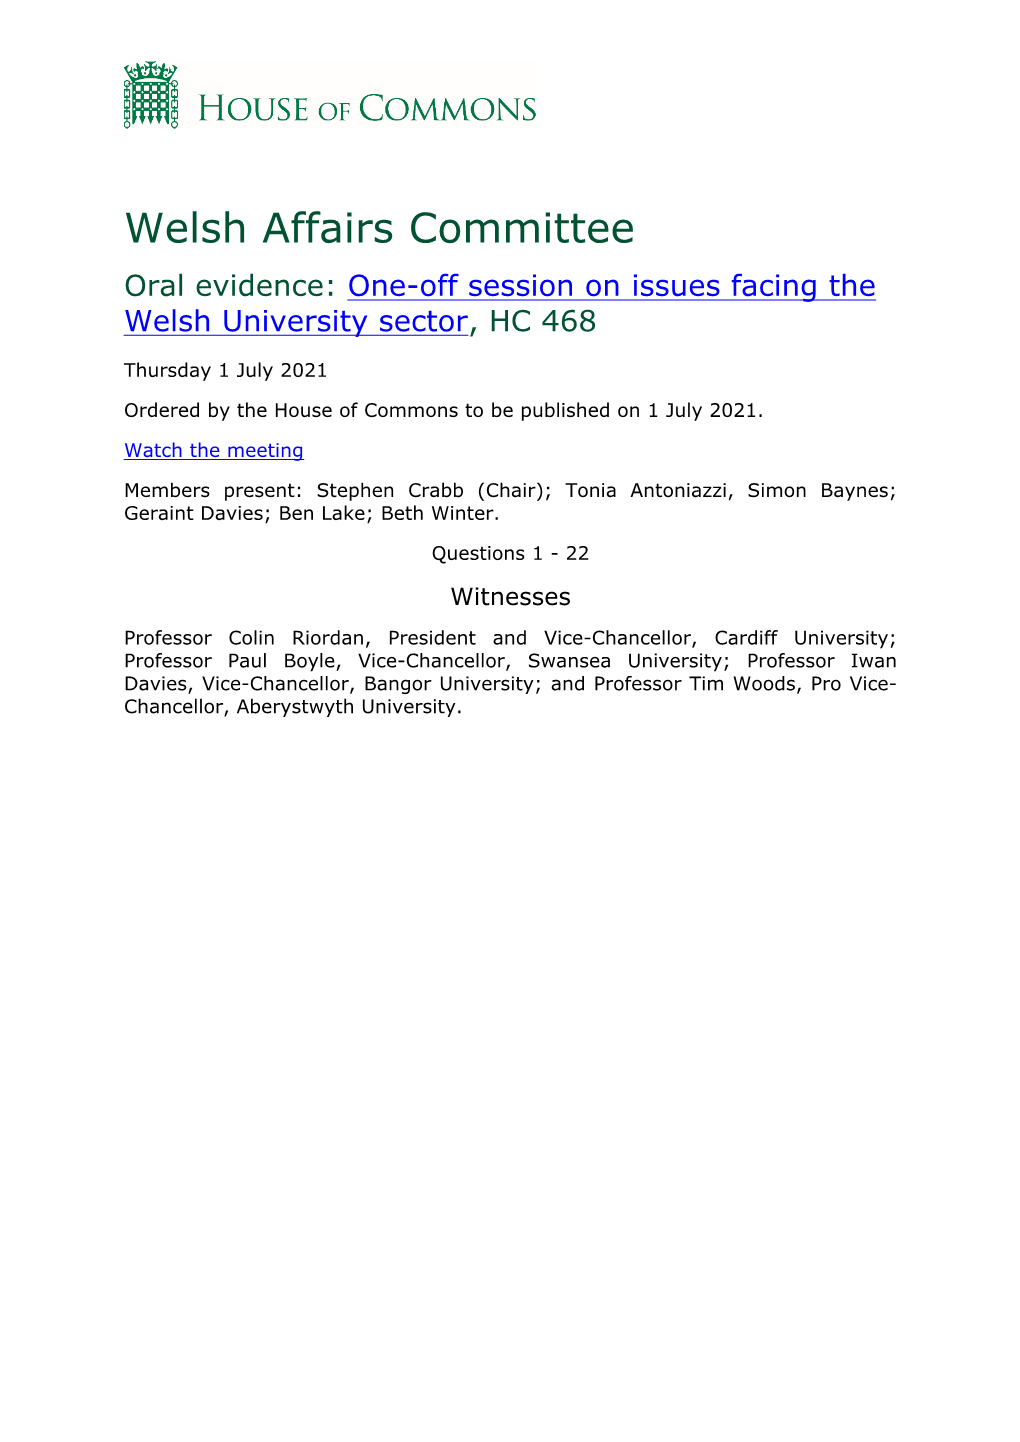 Welsh Affairs Committee Oral Evidence: One-Off Session on Issues Facing the Welsh University Sector, HC 468